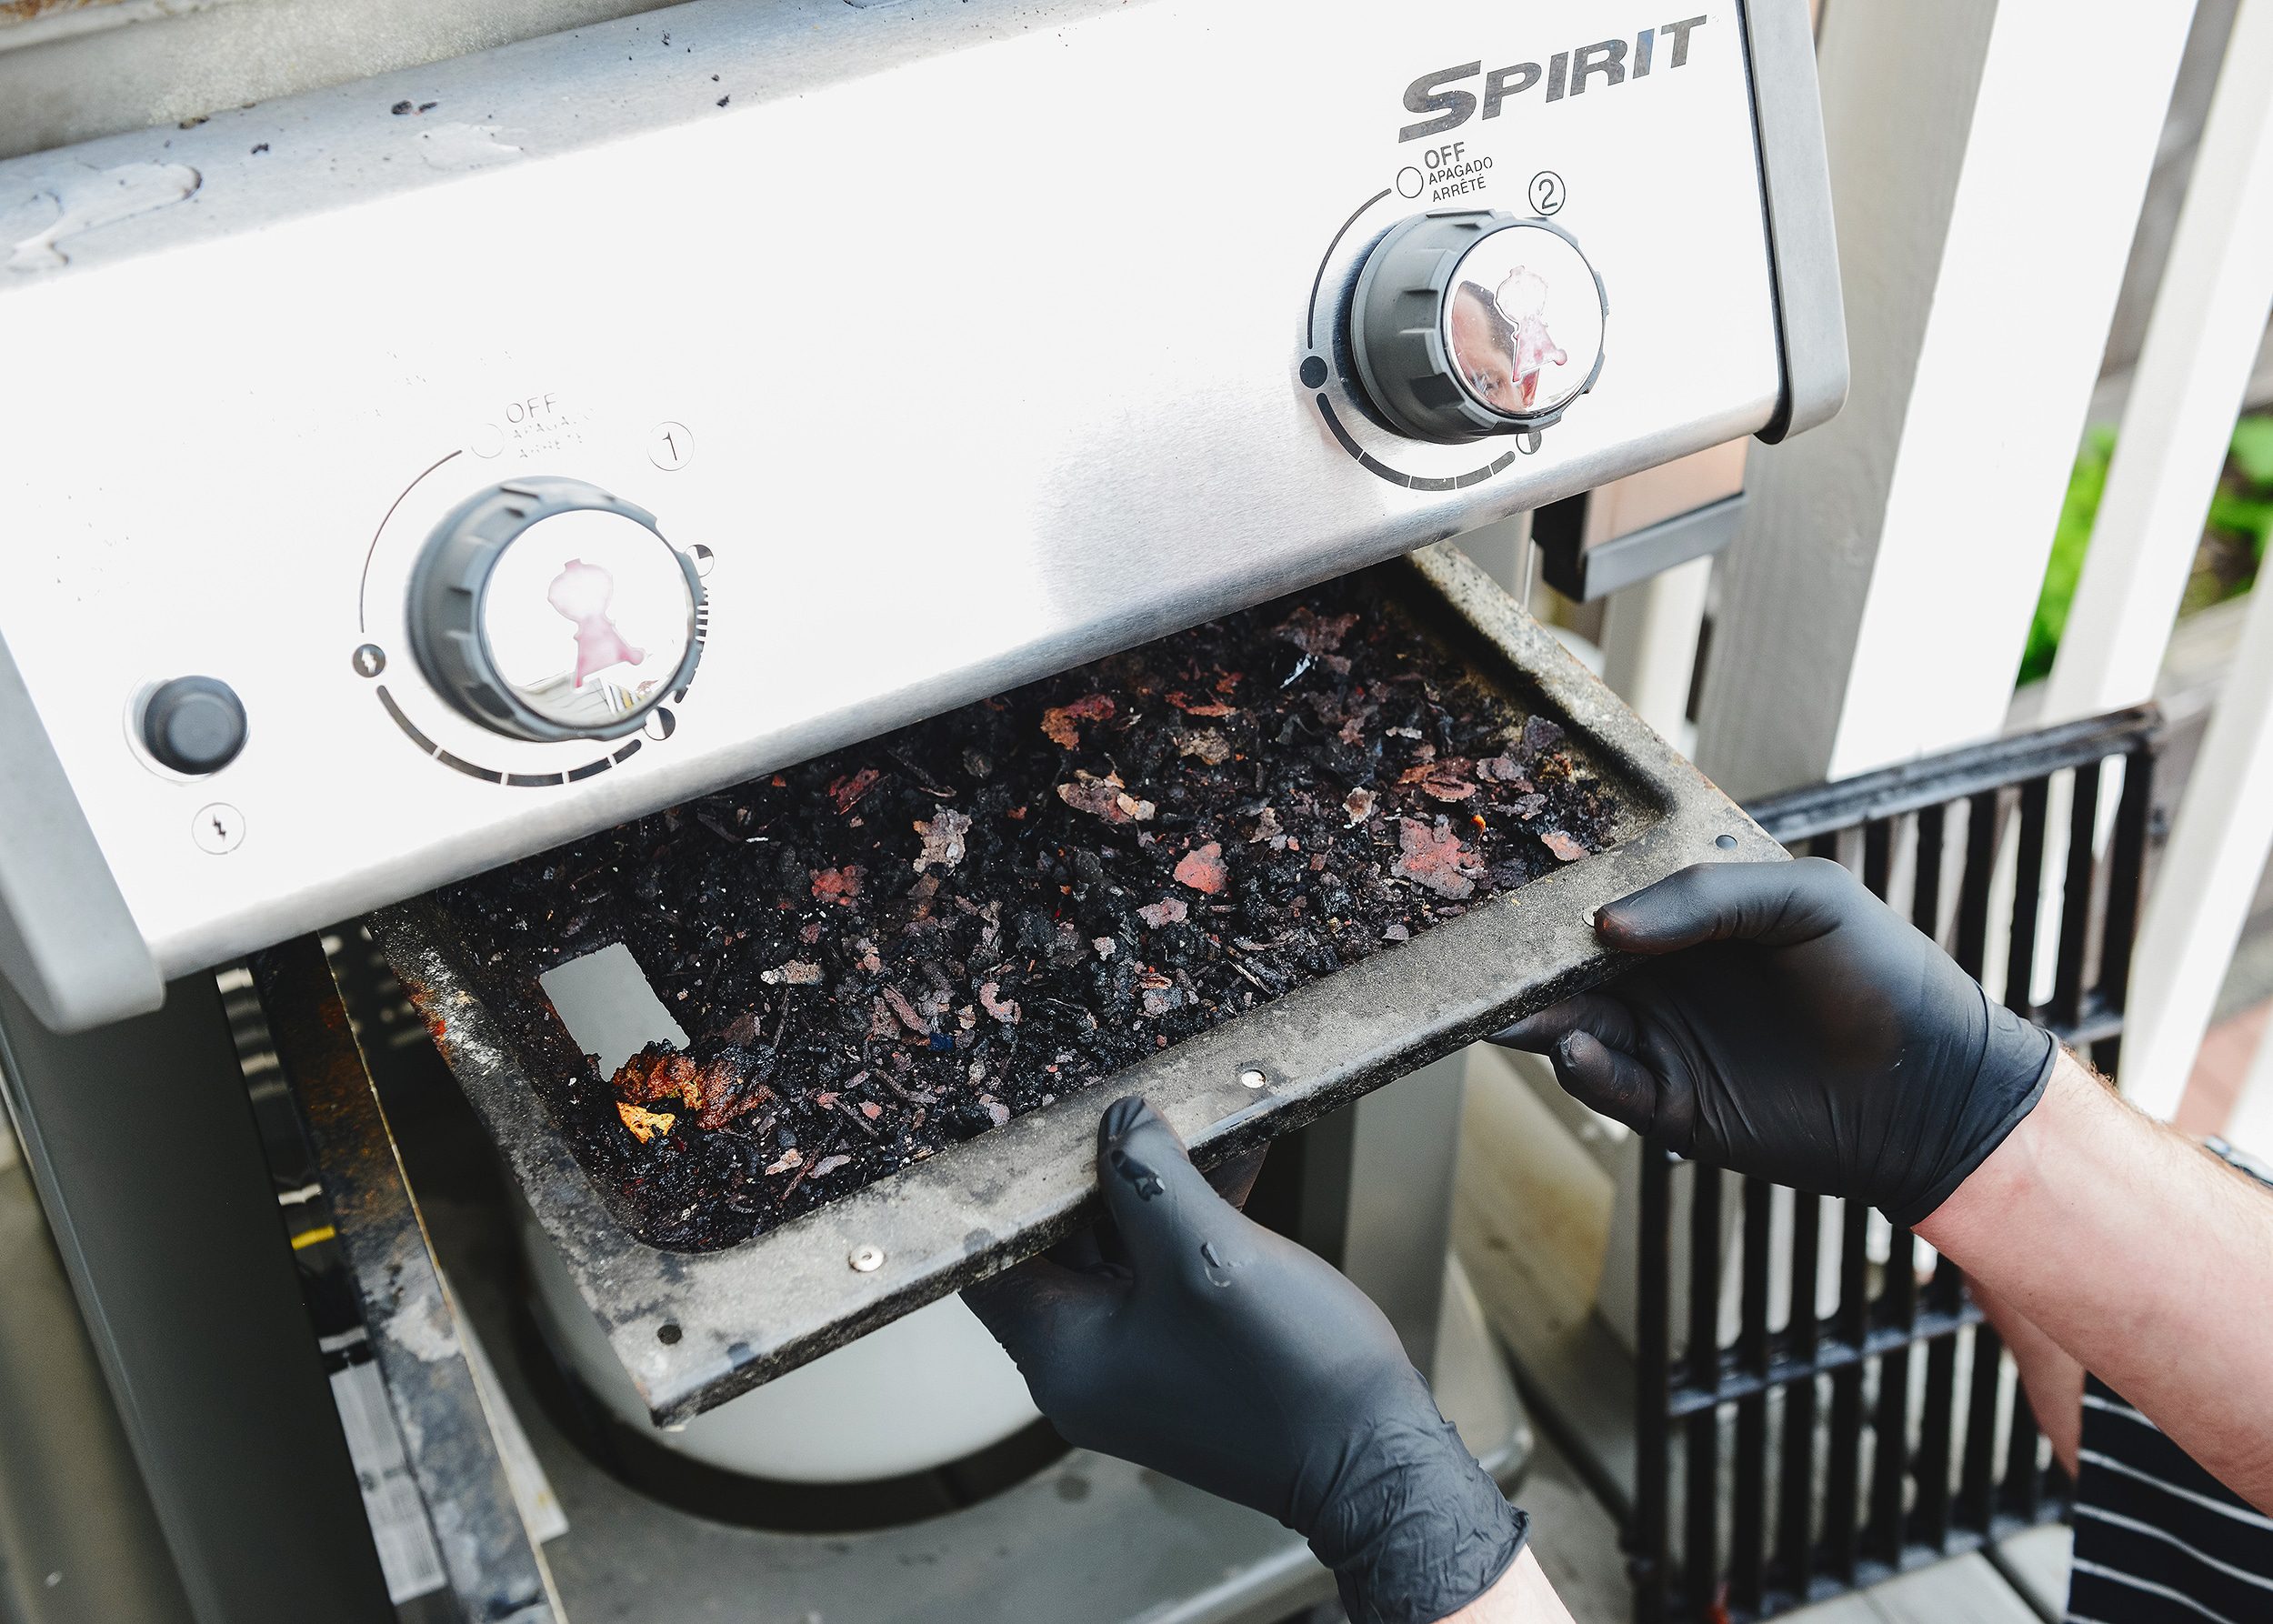 The overflowing grease try is removed from a Weber Spirit 210 gas grill // via yellow brick home